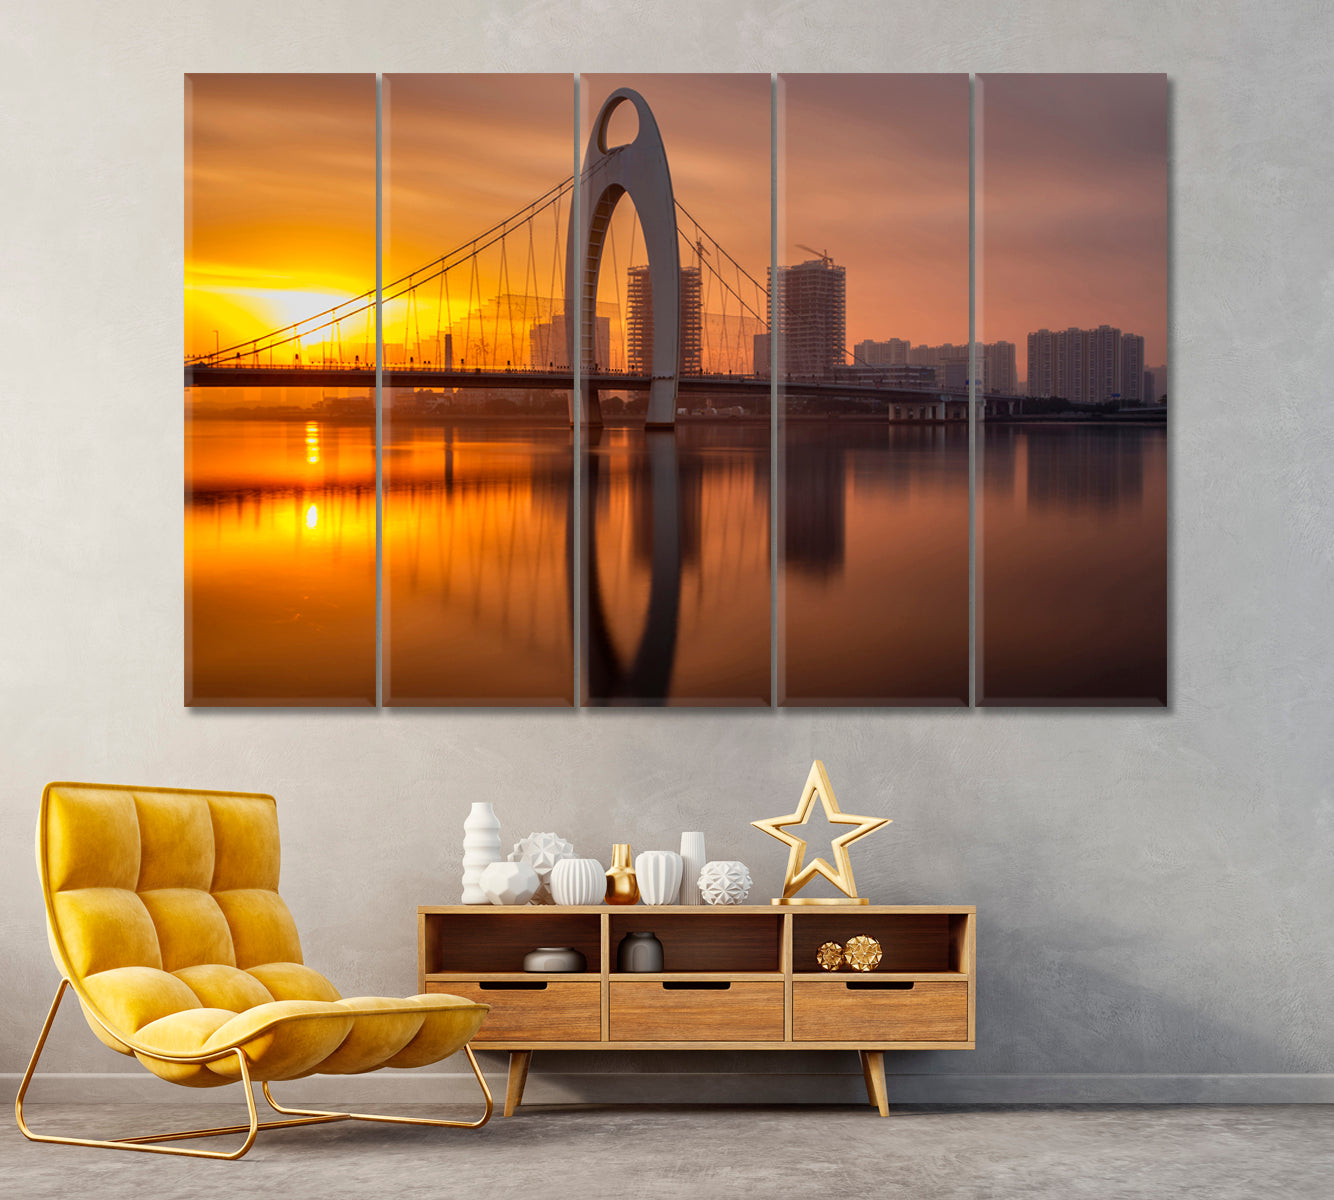 Modern Building of Financial District in Guangzhou Canvas Print ArtLexy 5 Panels 36"x24" inches 